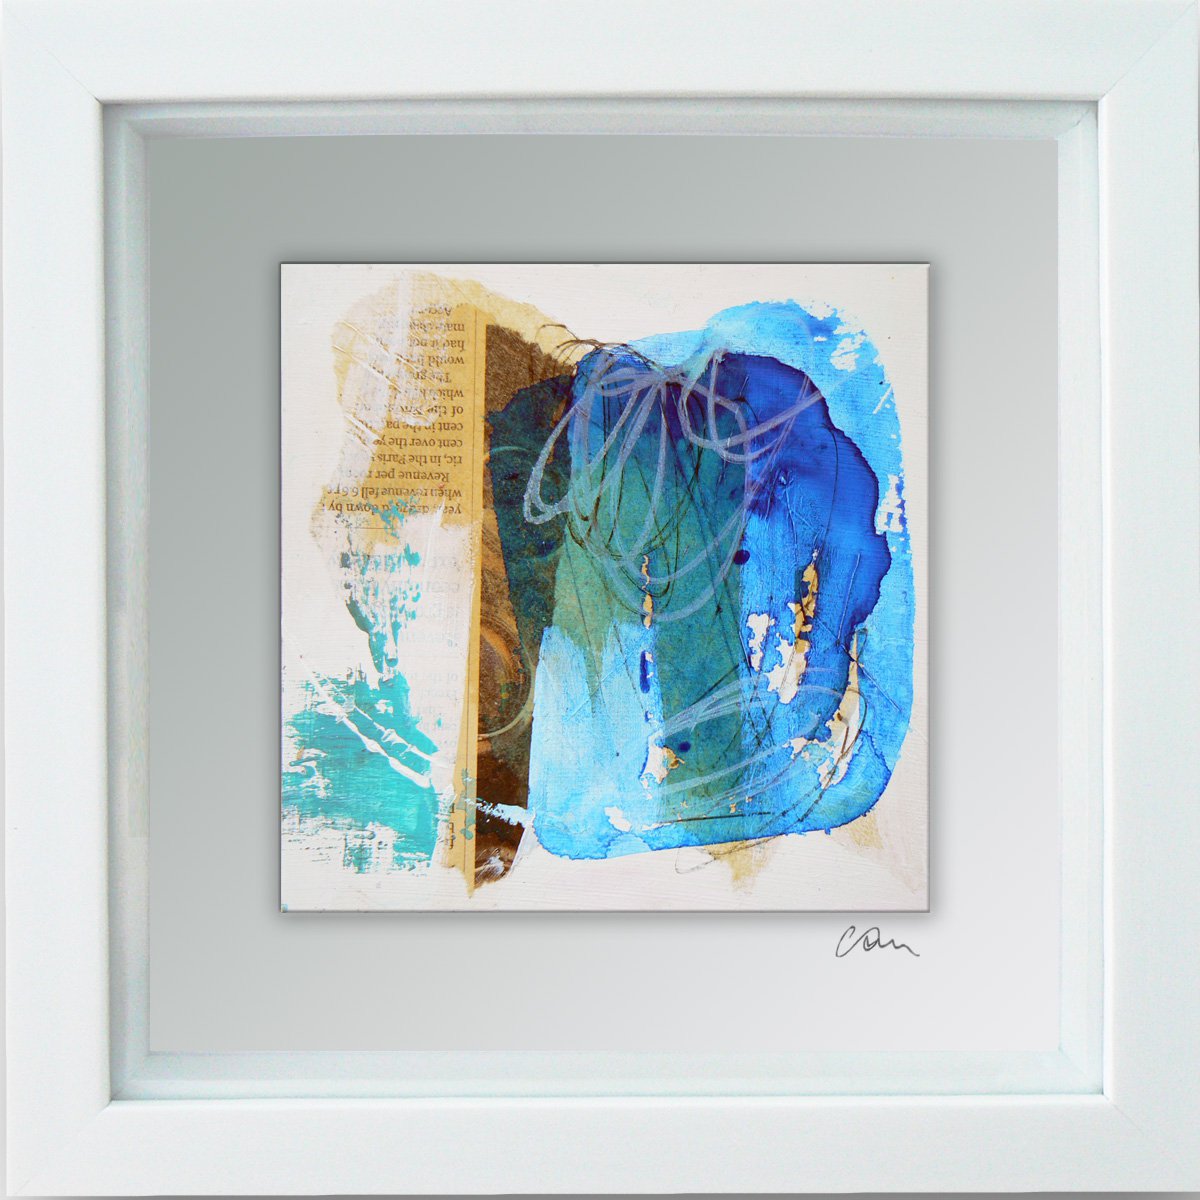 Framed ready to hang original abstract - Chaos #1 by Carolynne Coulson